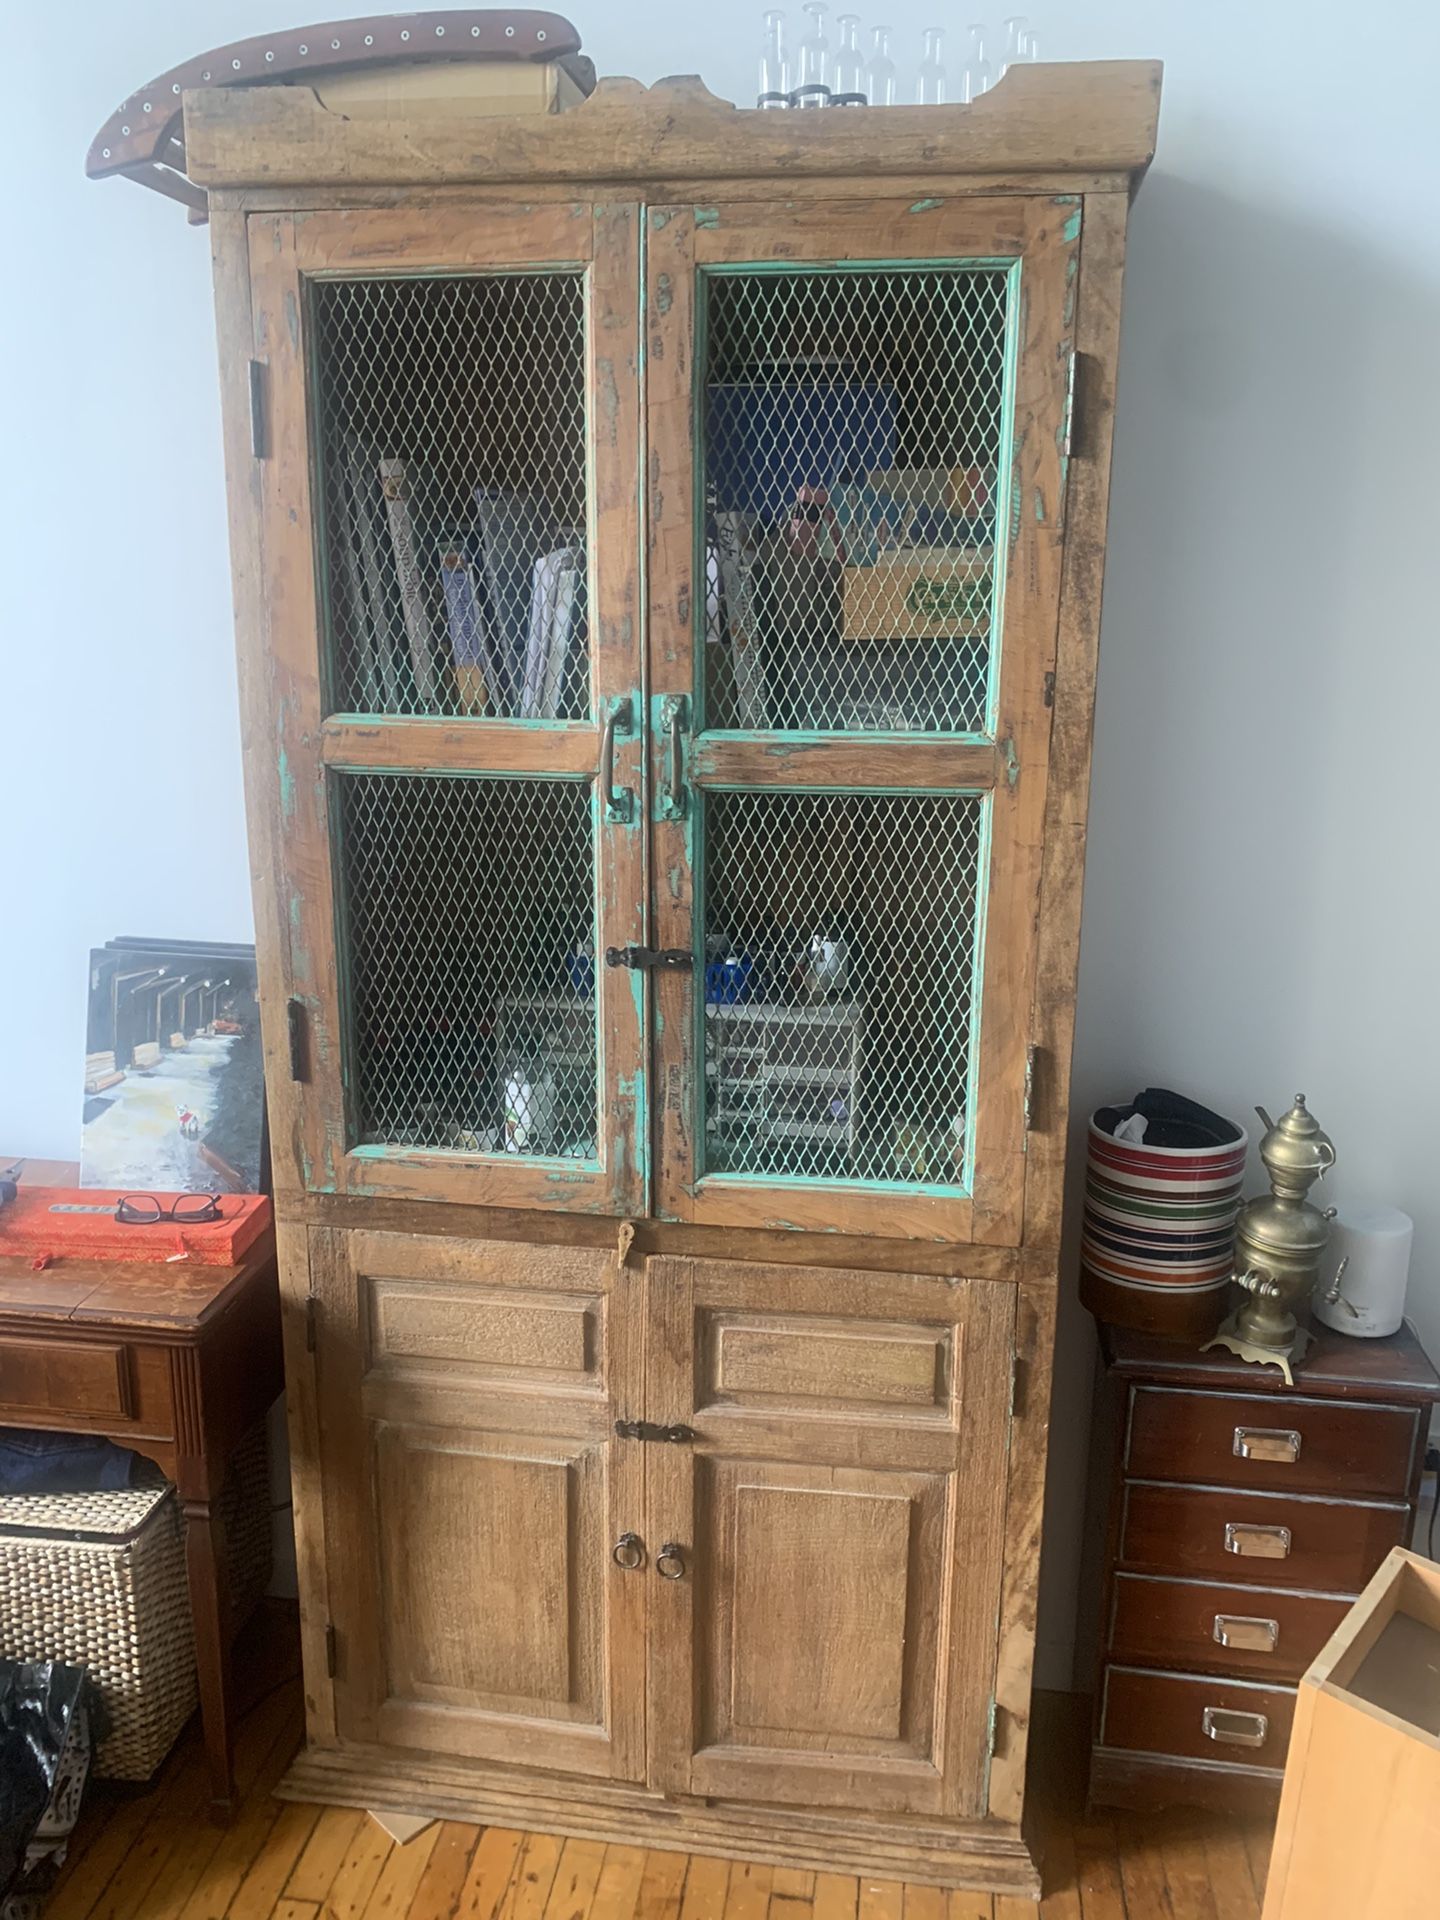 7’ Tall Teakwood Cabinet From Indonesia 14”deep and 41”wide